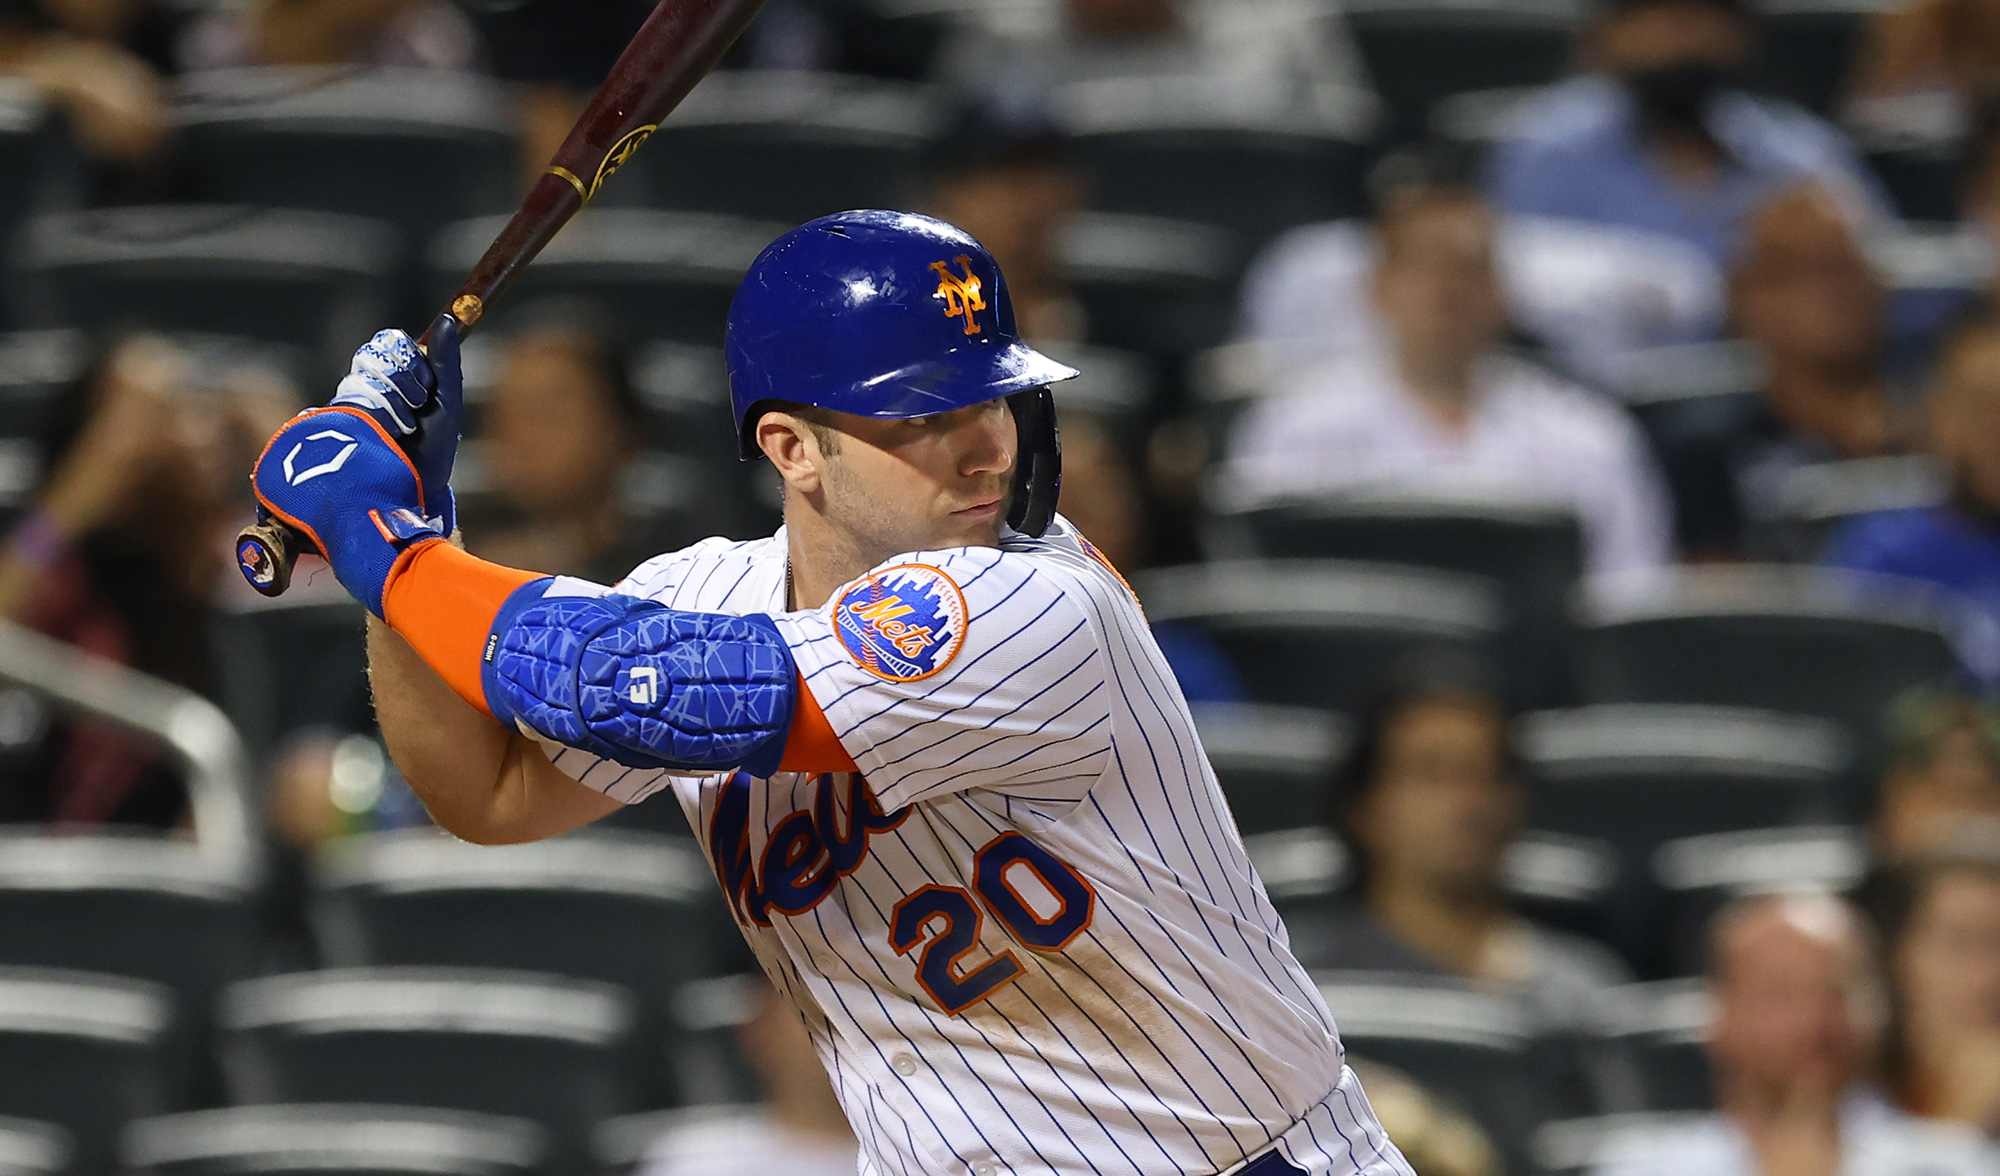 Mets star Pete Alonso claims he nearly died in car accident